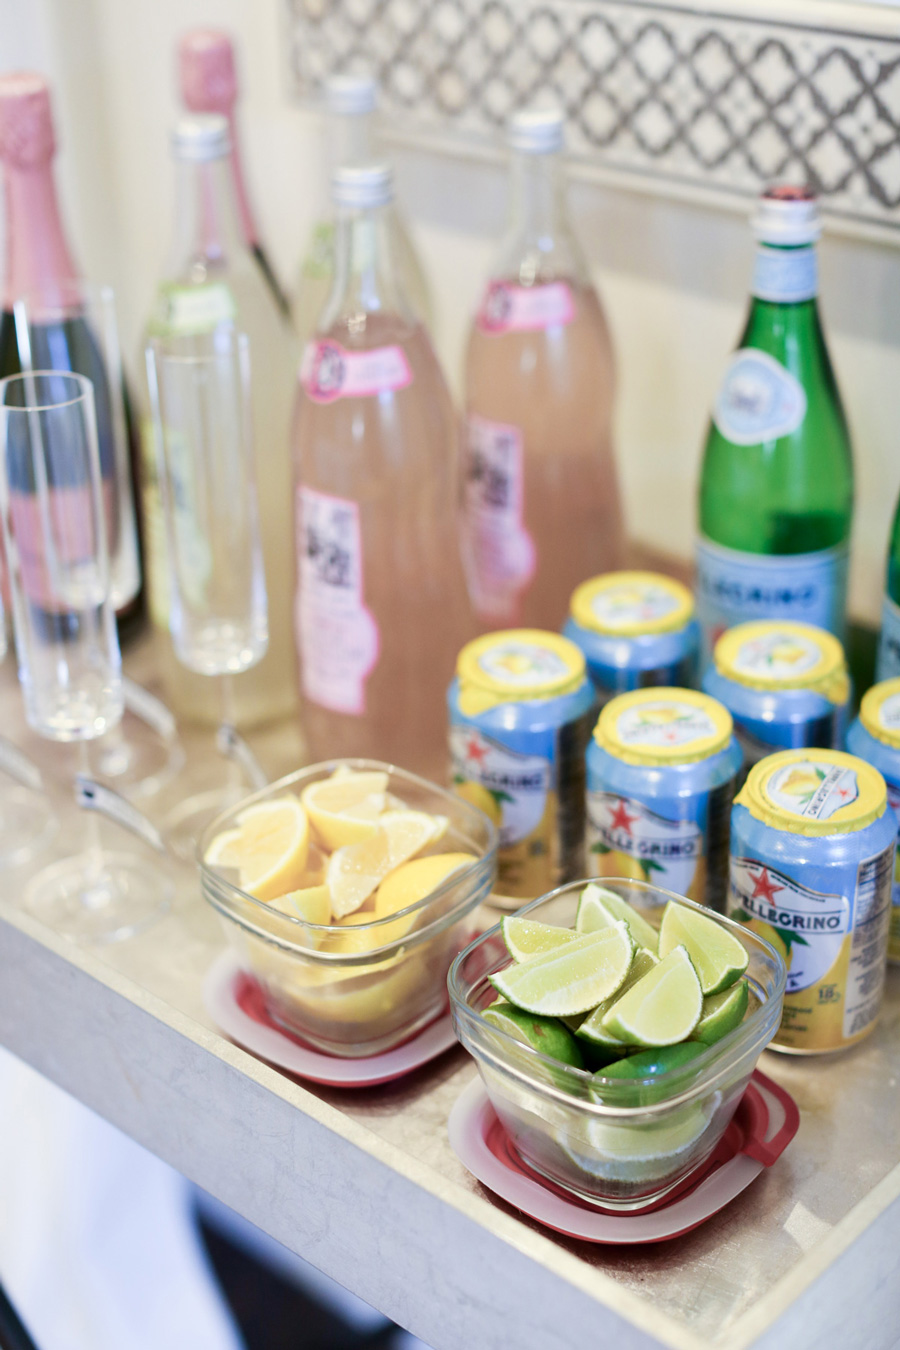 How To Throw A Great Housewarming Party!